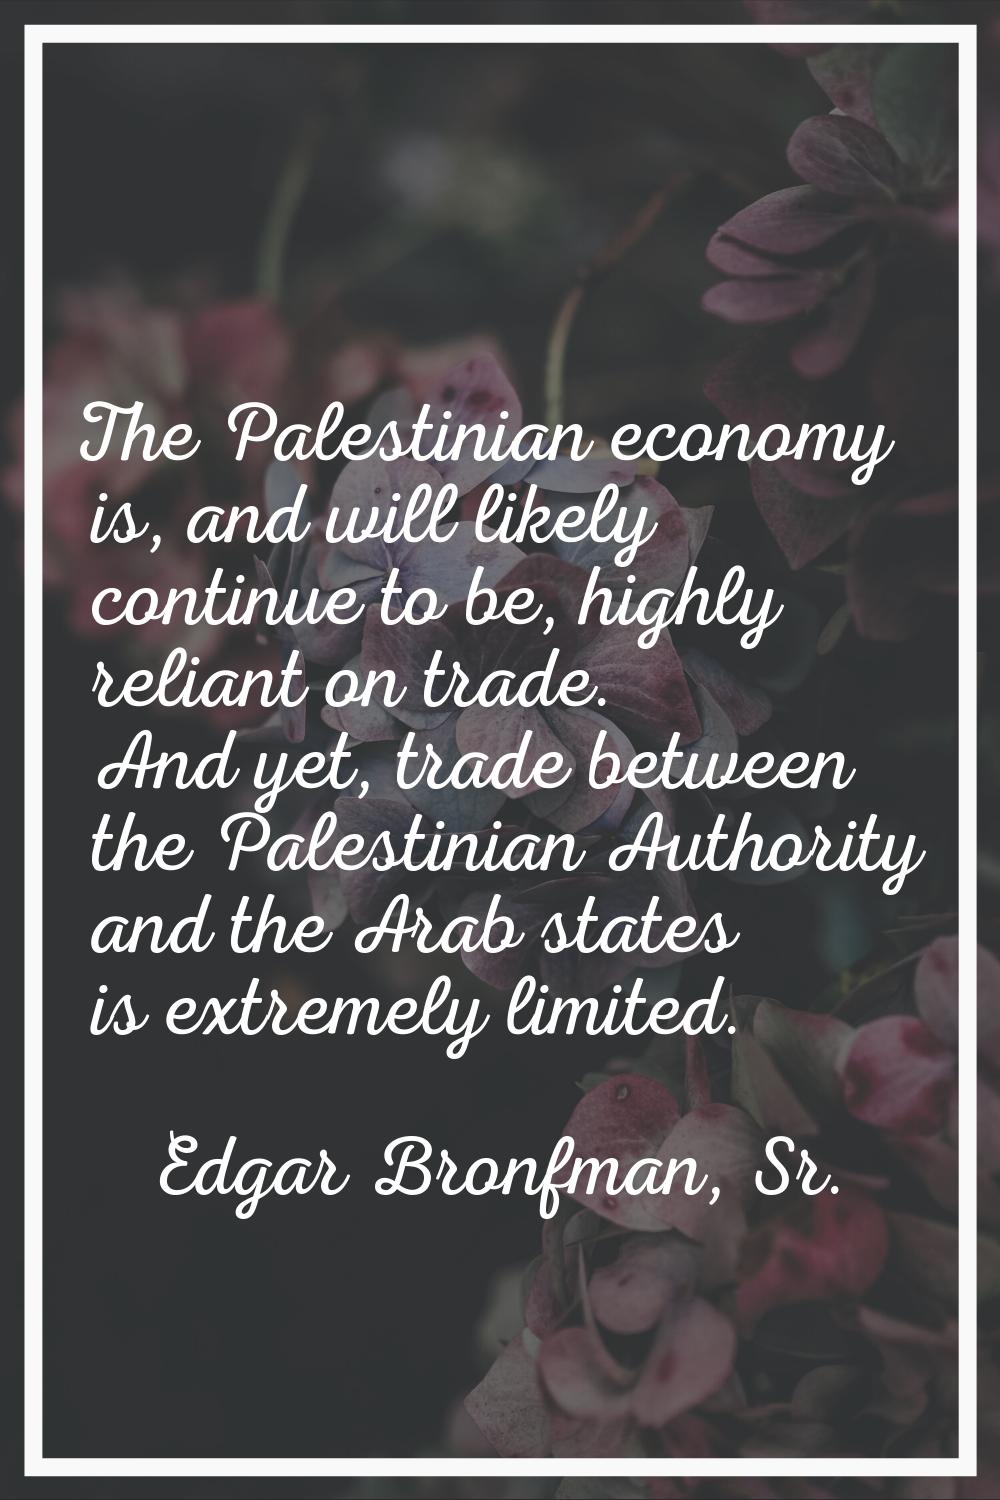 The Palestinian economy is, and will likely continue to be, highly reliant on trade. And yet, trade